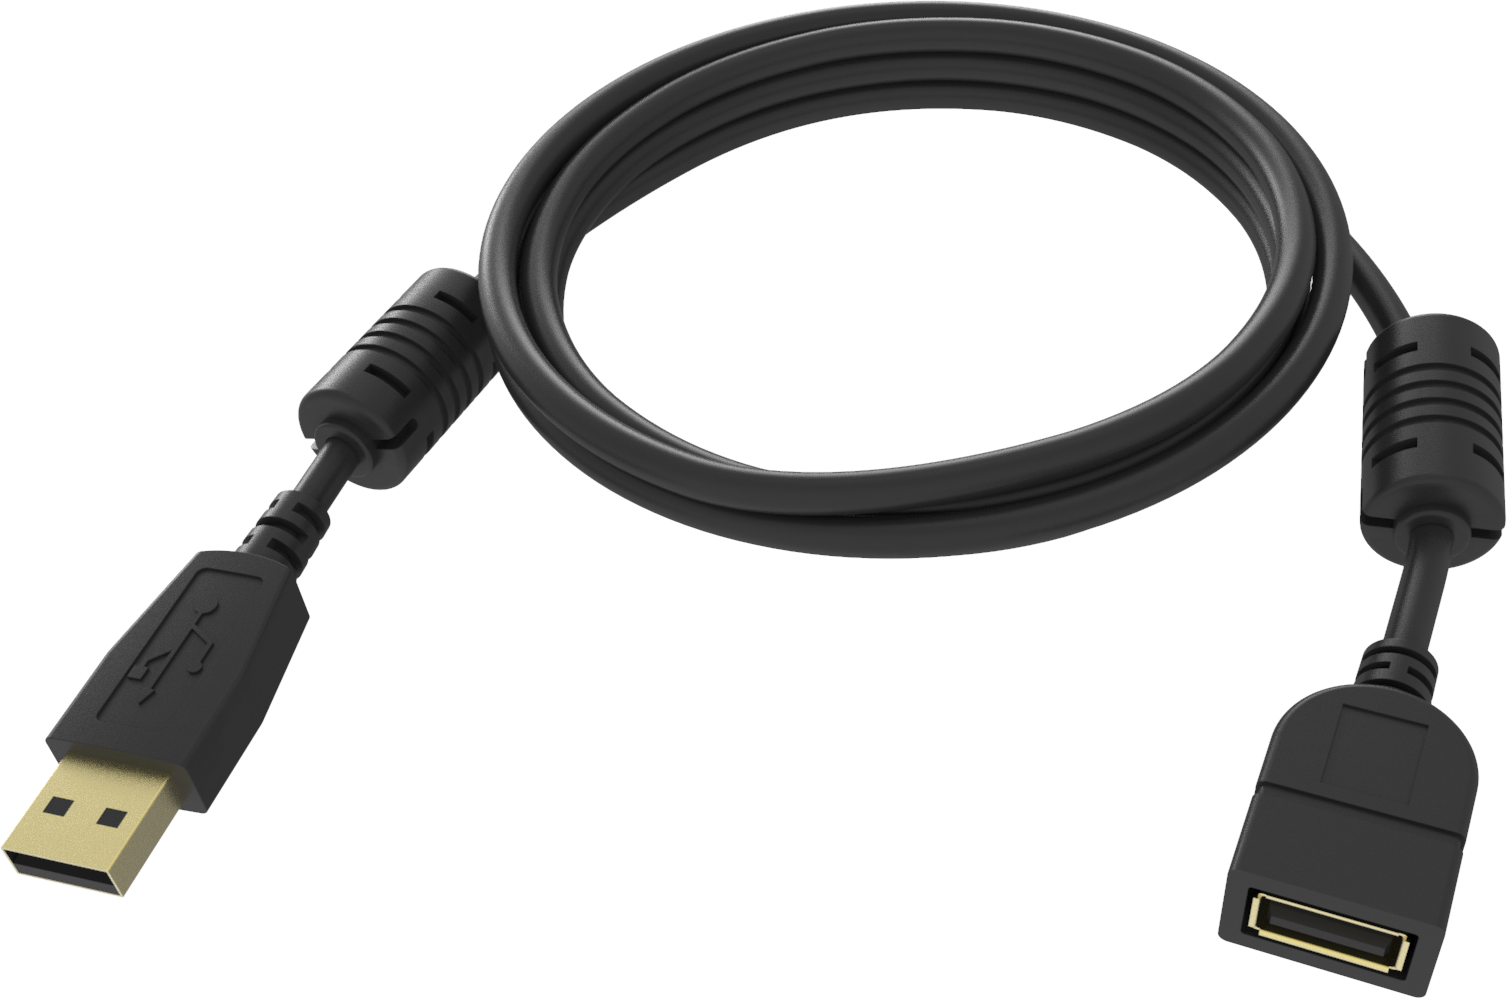 An image showing Black USB 2.0 Extension Cable 2m (7ft)